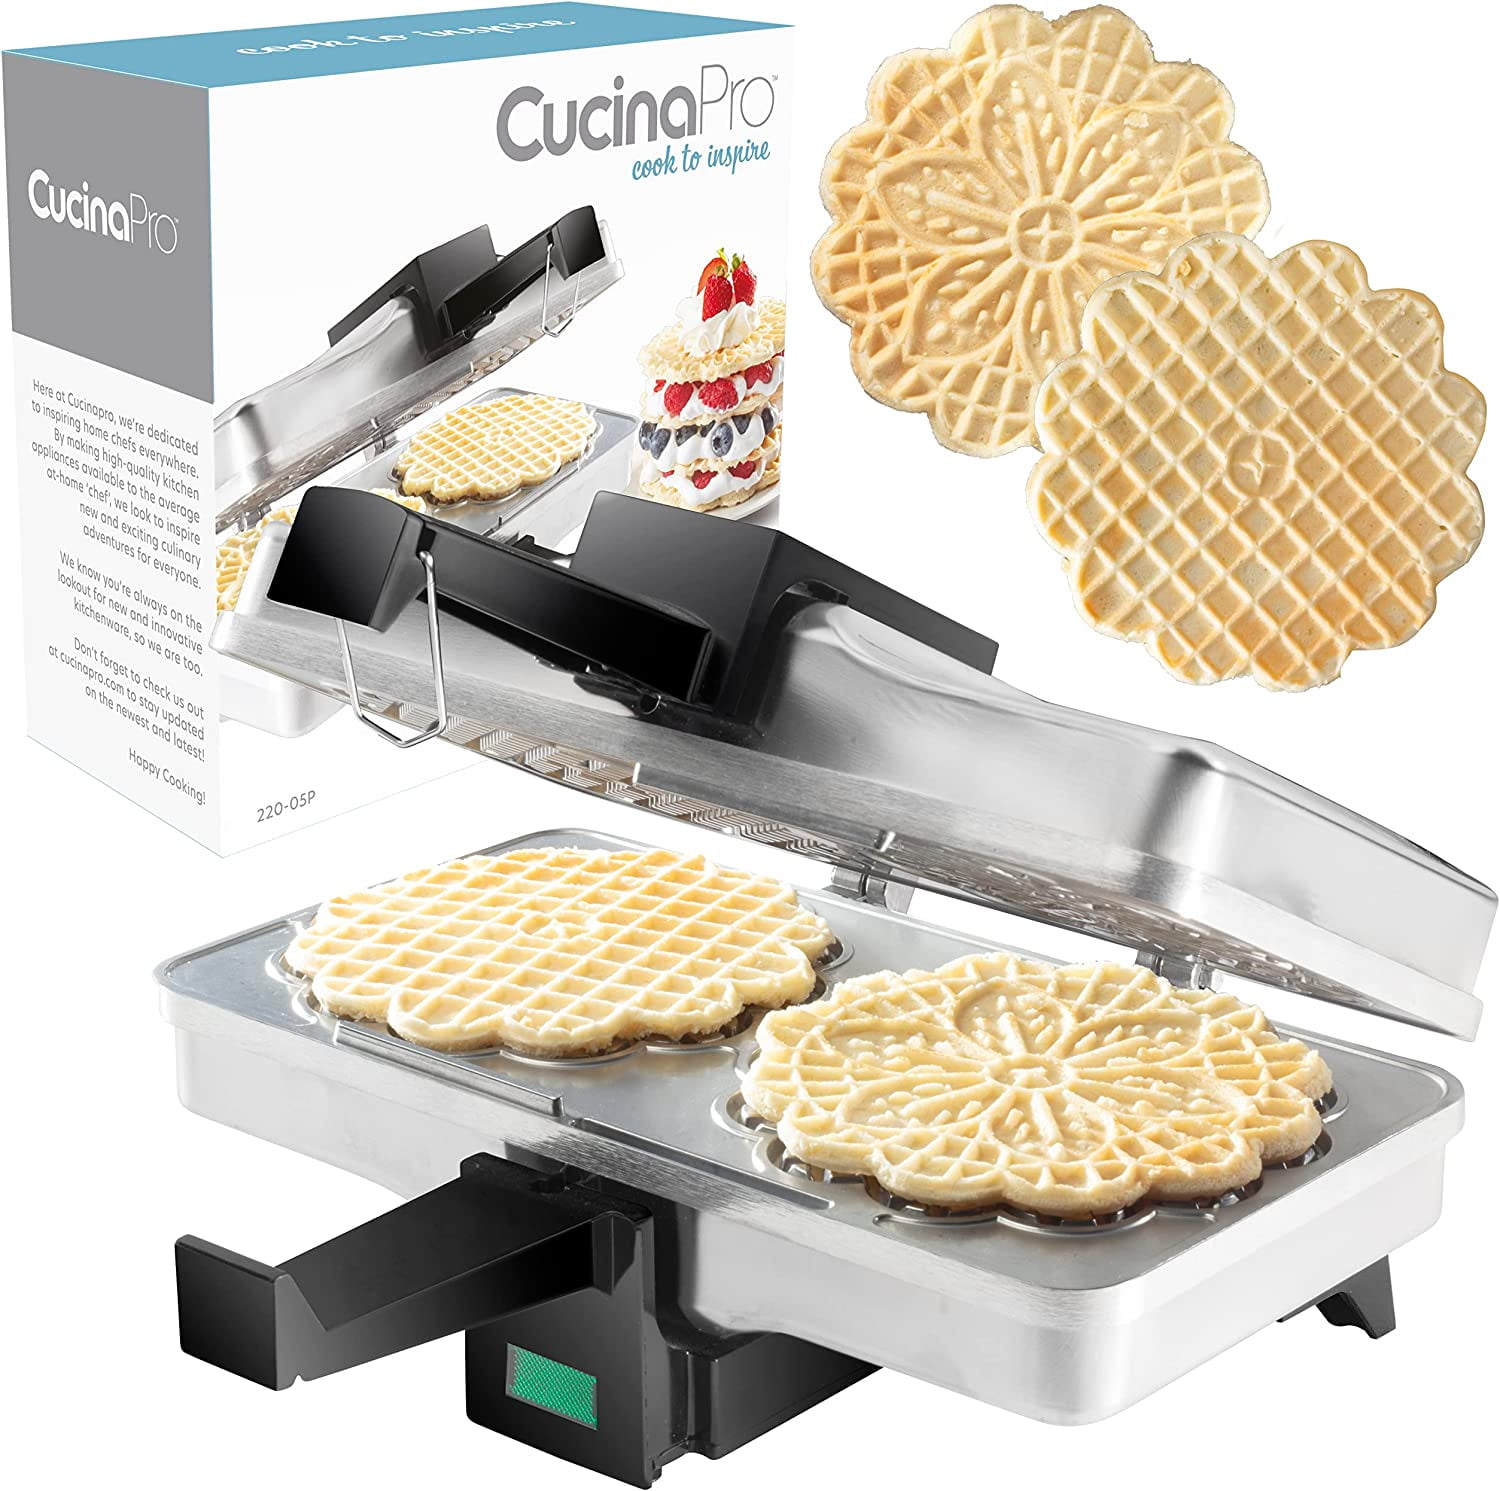  FineMade Pizzelle Maker with Non-Stick Coating, Electric  Pizzelle Cookie Baker Press with Snowflake Pattern, Make Two 4 Inch  Traditional Italian Waffle Cookies at Once, Recipe Included: Home & Kitchen